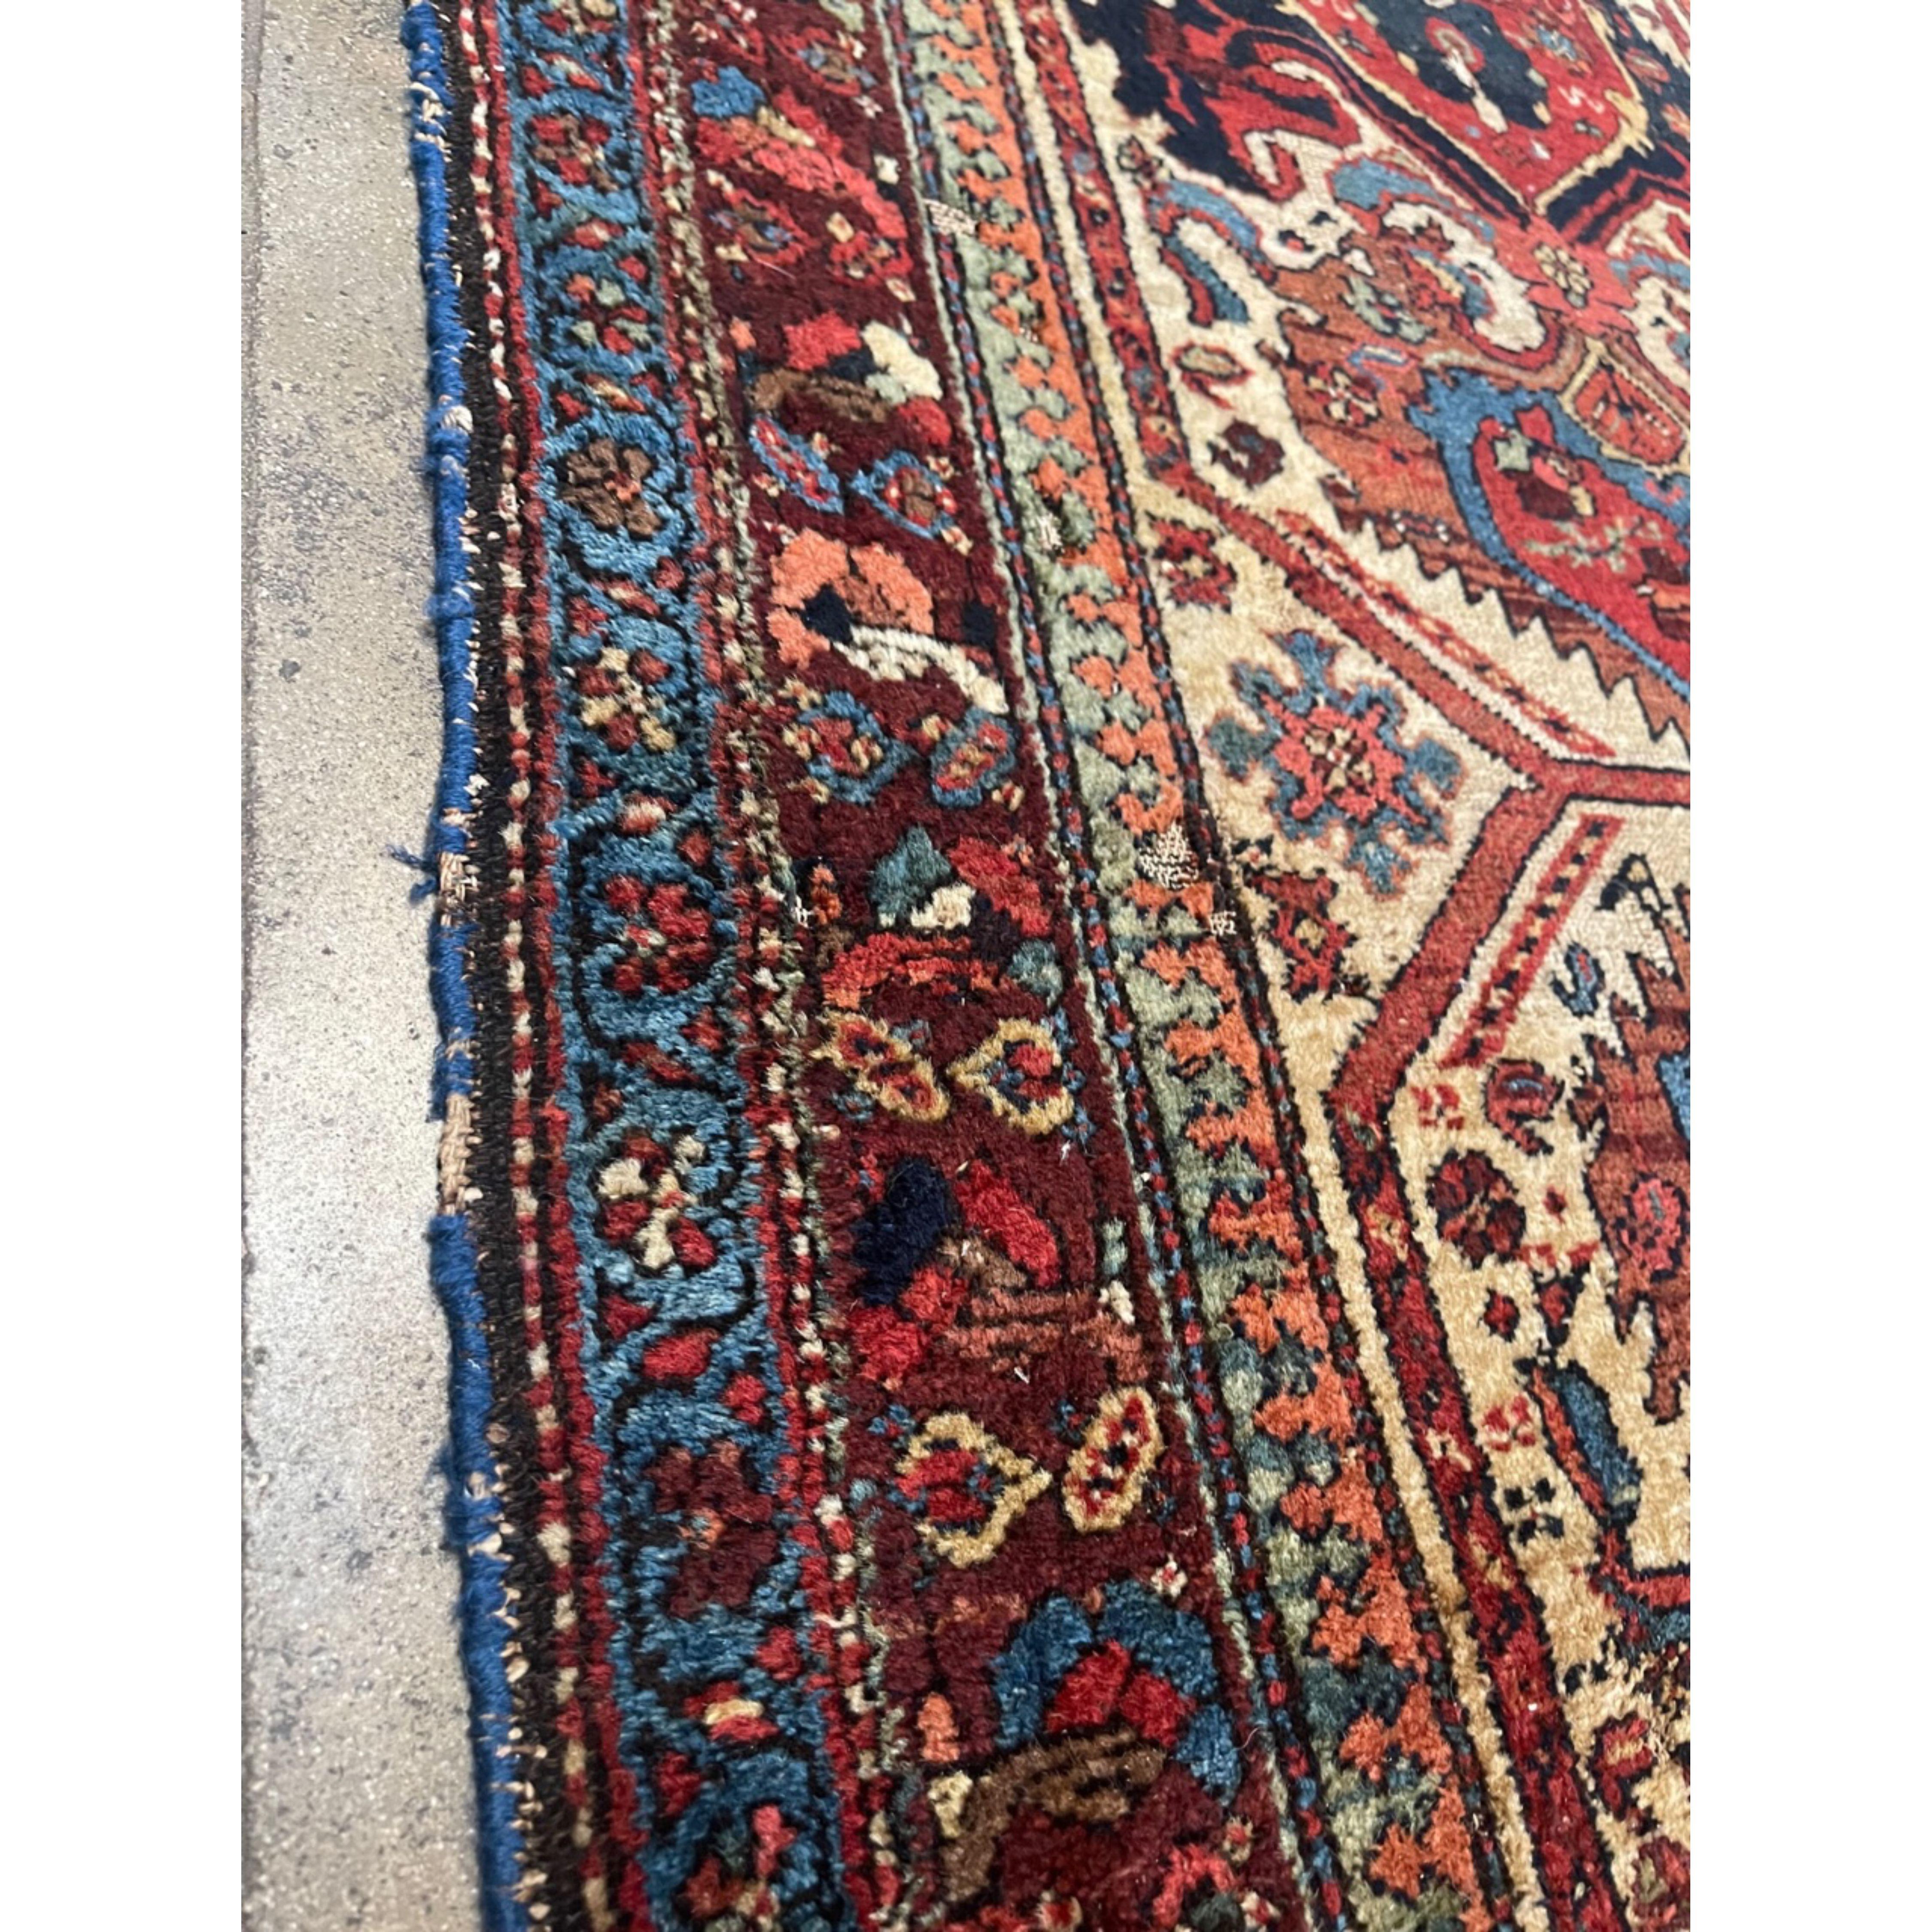 Shirvan rugs – The historic Khanate or administrative district of Shirvan produced many highly decorative antique rugs that have a formality and stylistic complexity that is found in few rugs from the Caucasus. The depth of colors, the complexity of